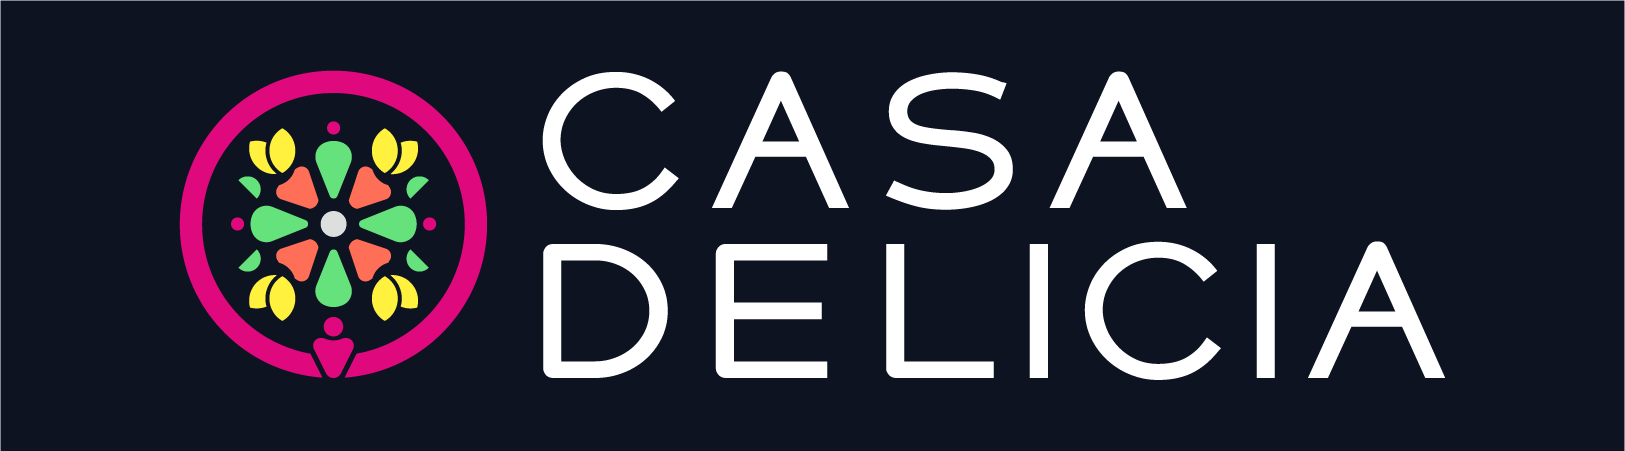 This image shows the logo for Casa Delicia.